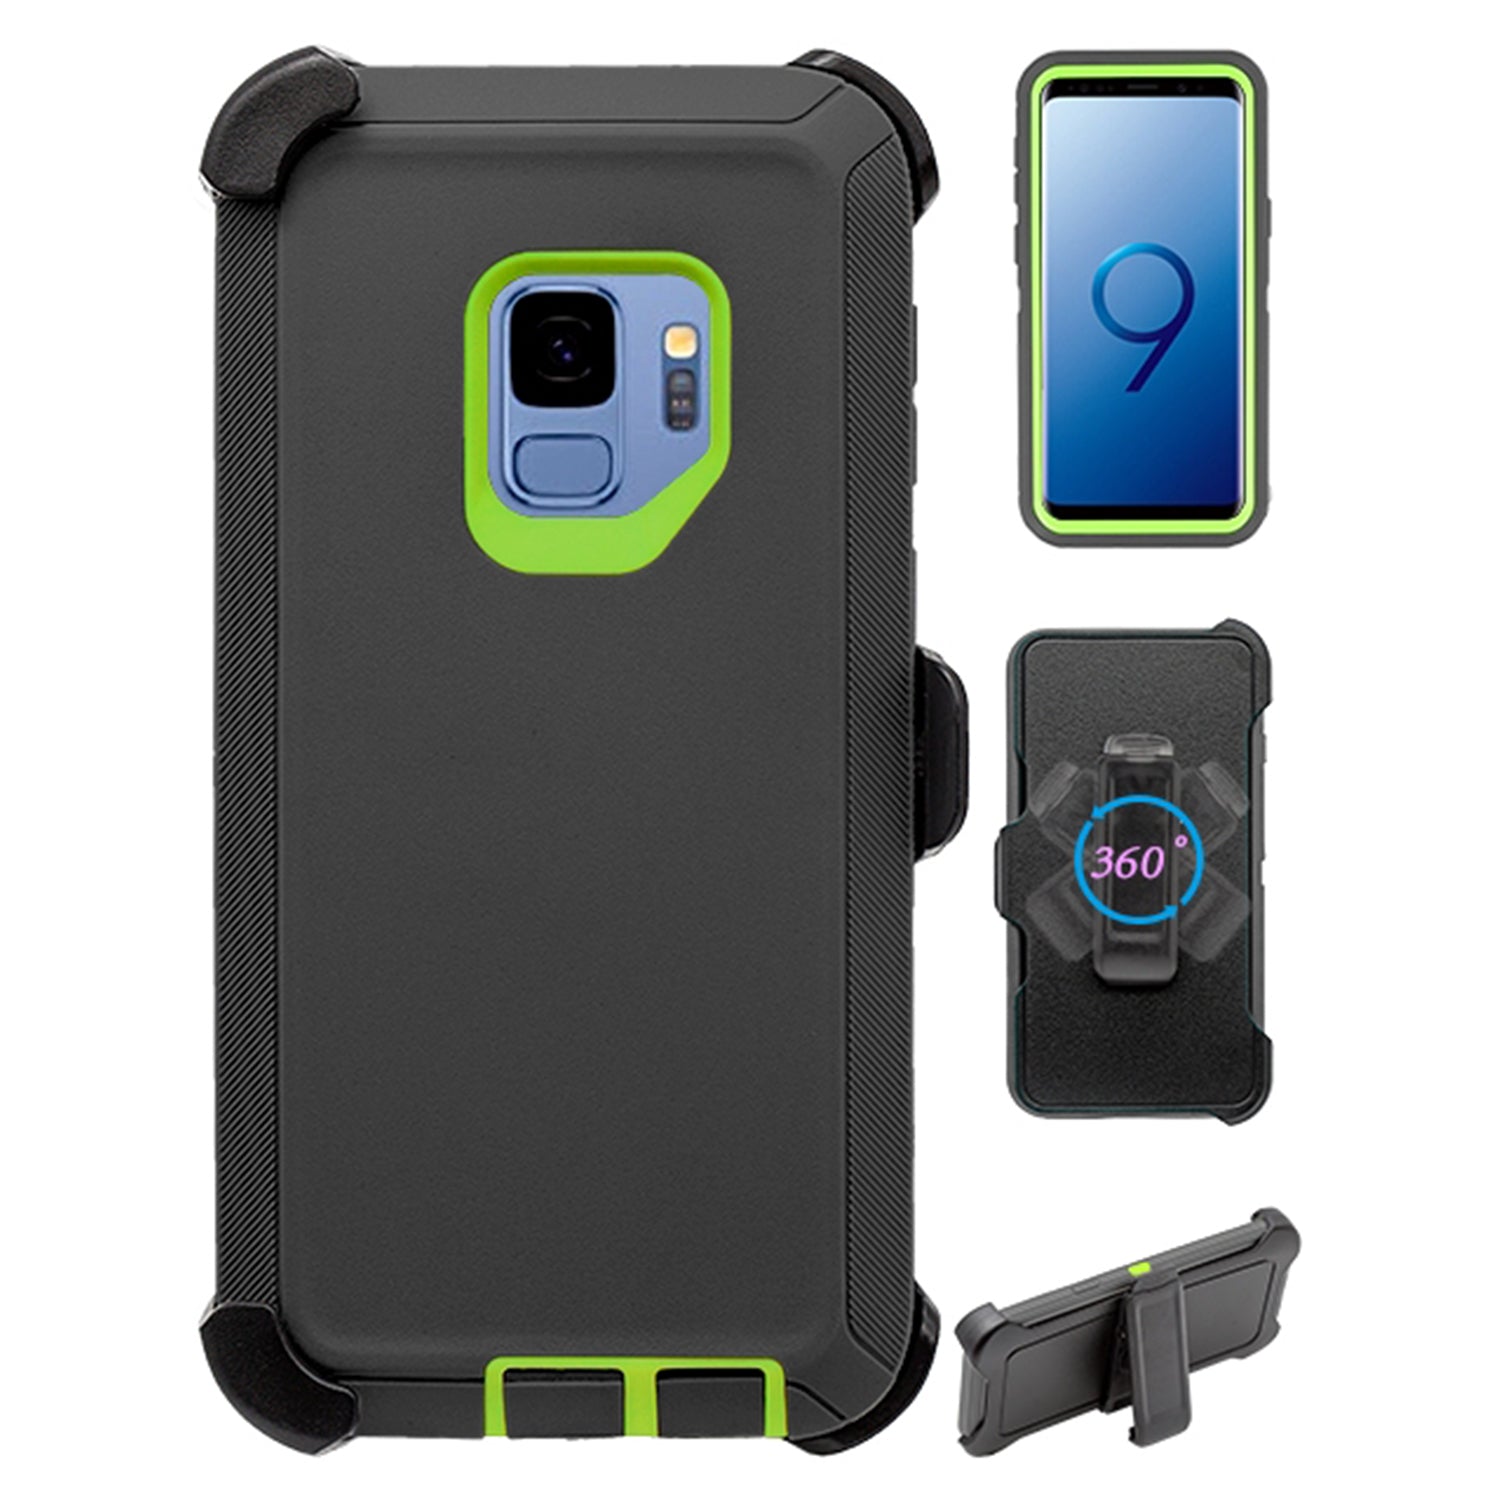 Heavy Duty Shock Reduction Case with Belt Clip (No Screen) for Galaxy S9